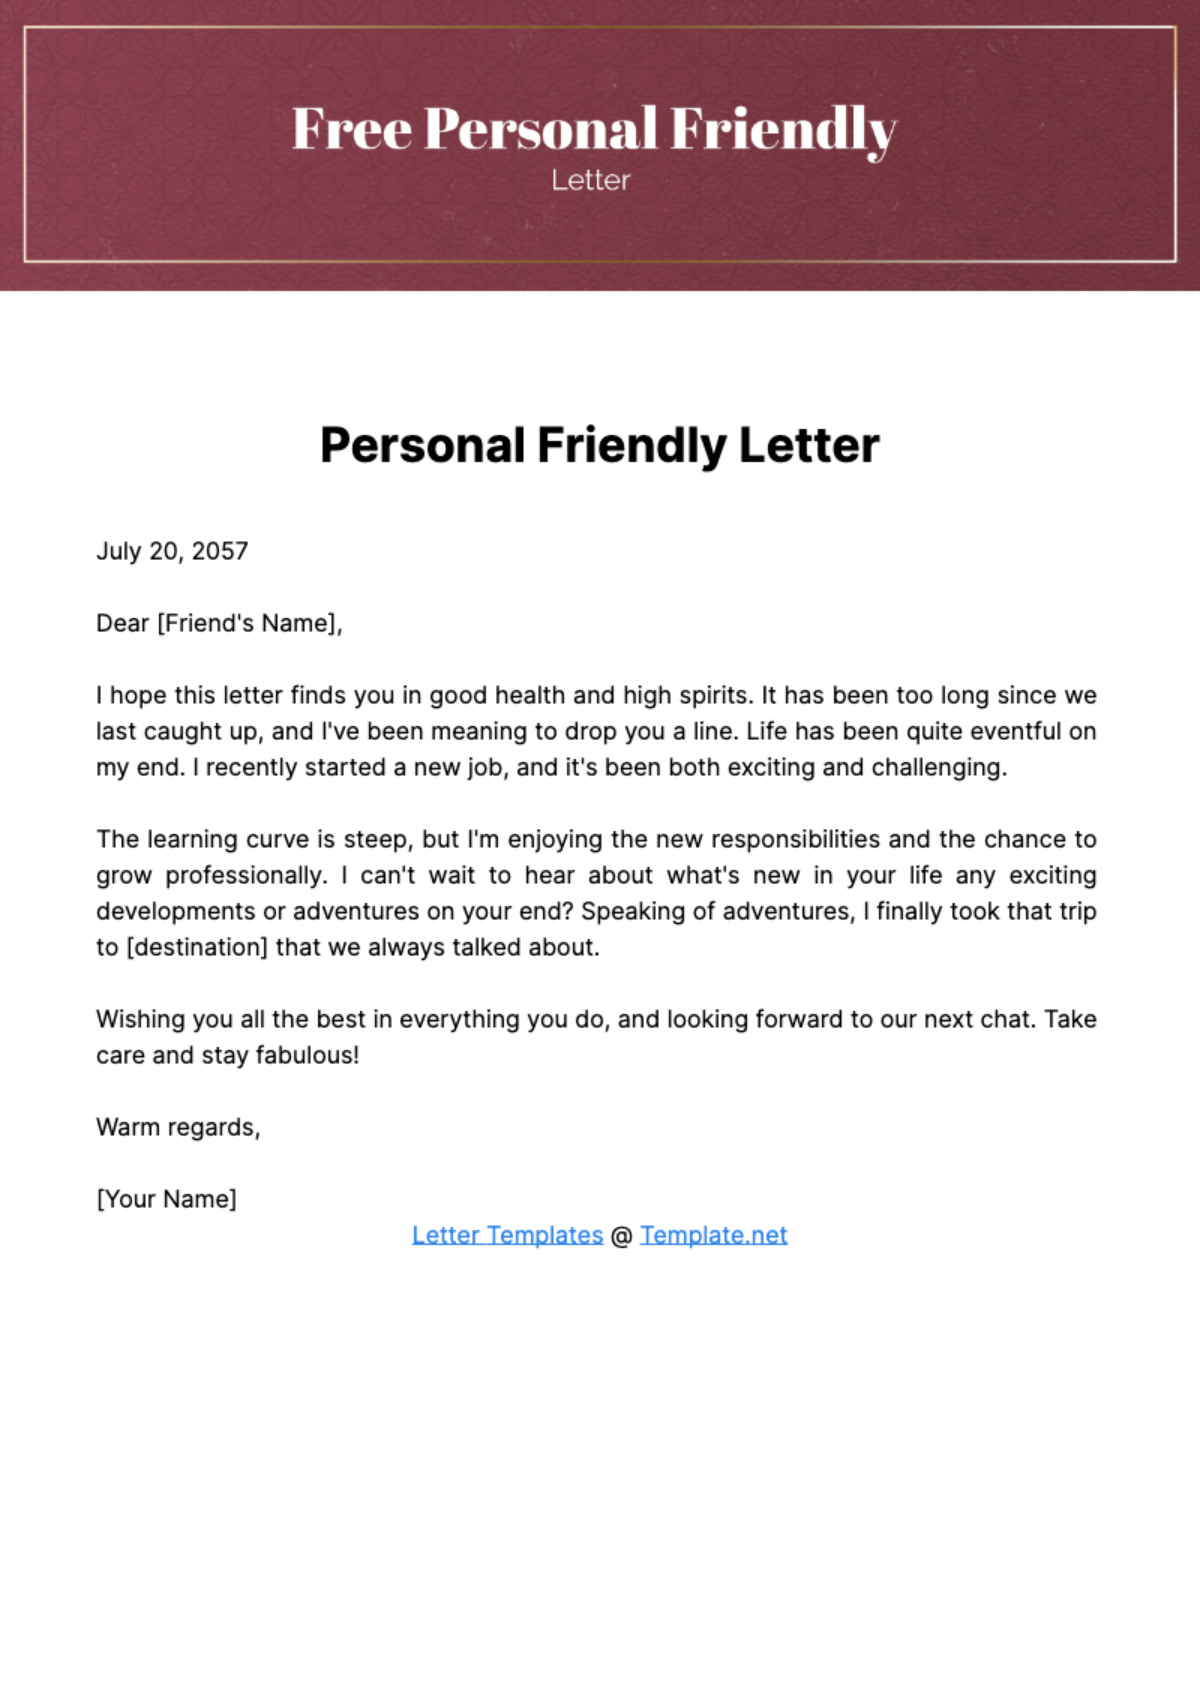 Personal Friendly Letter Template